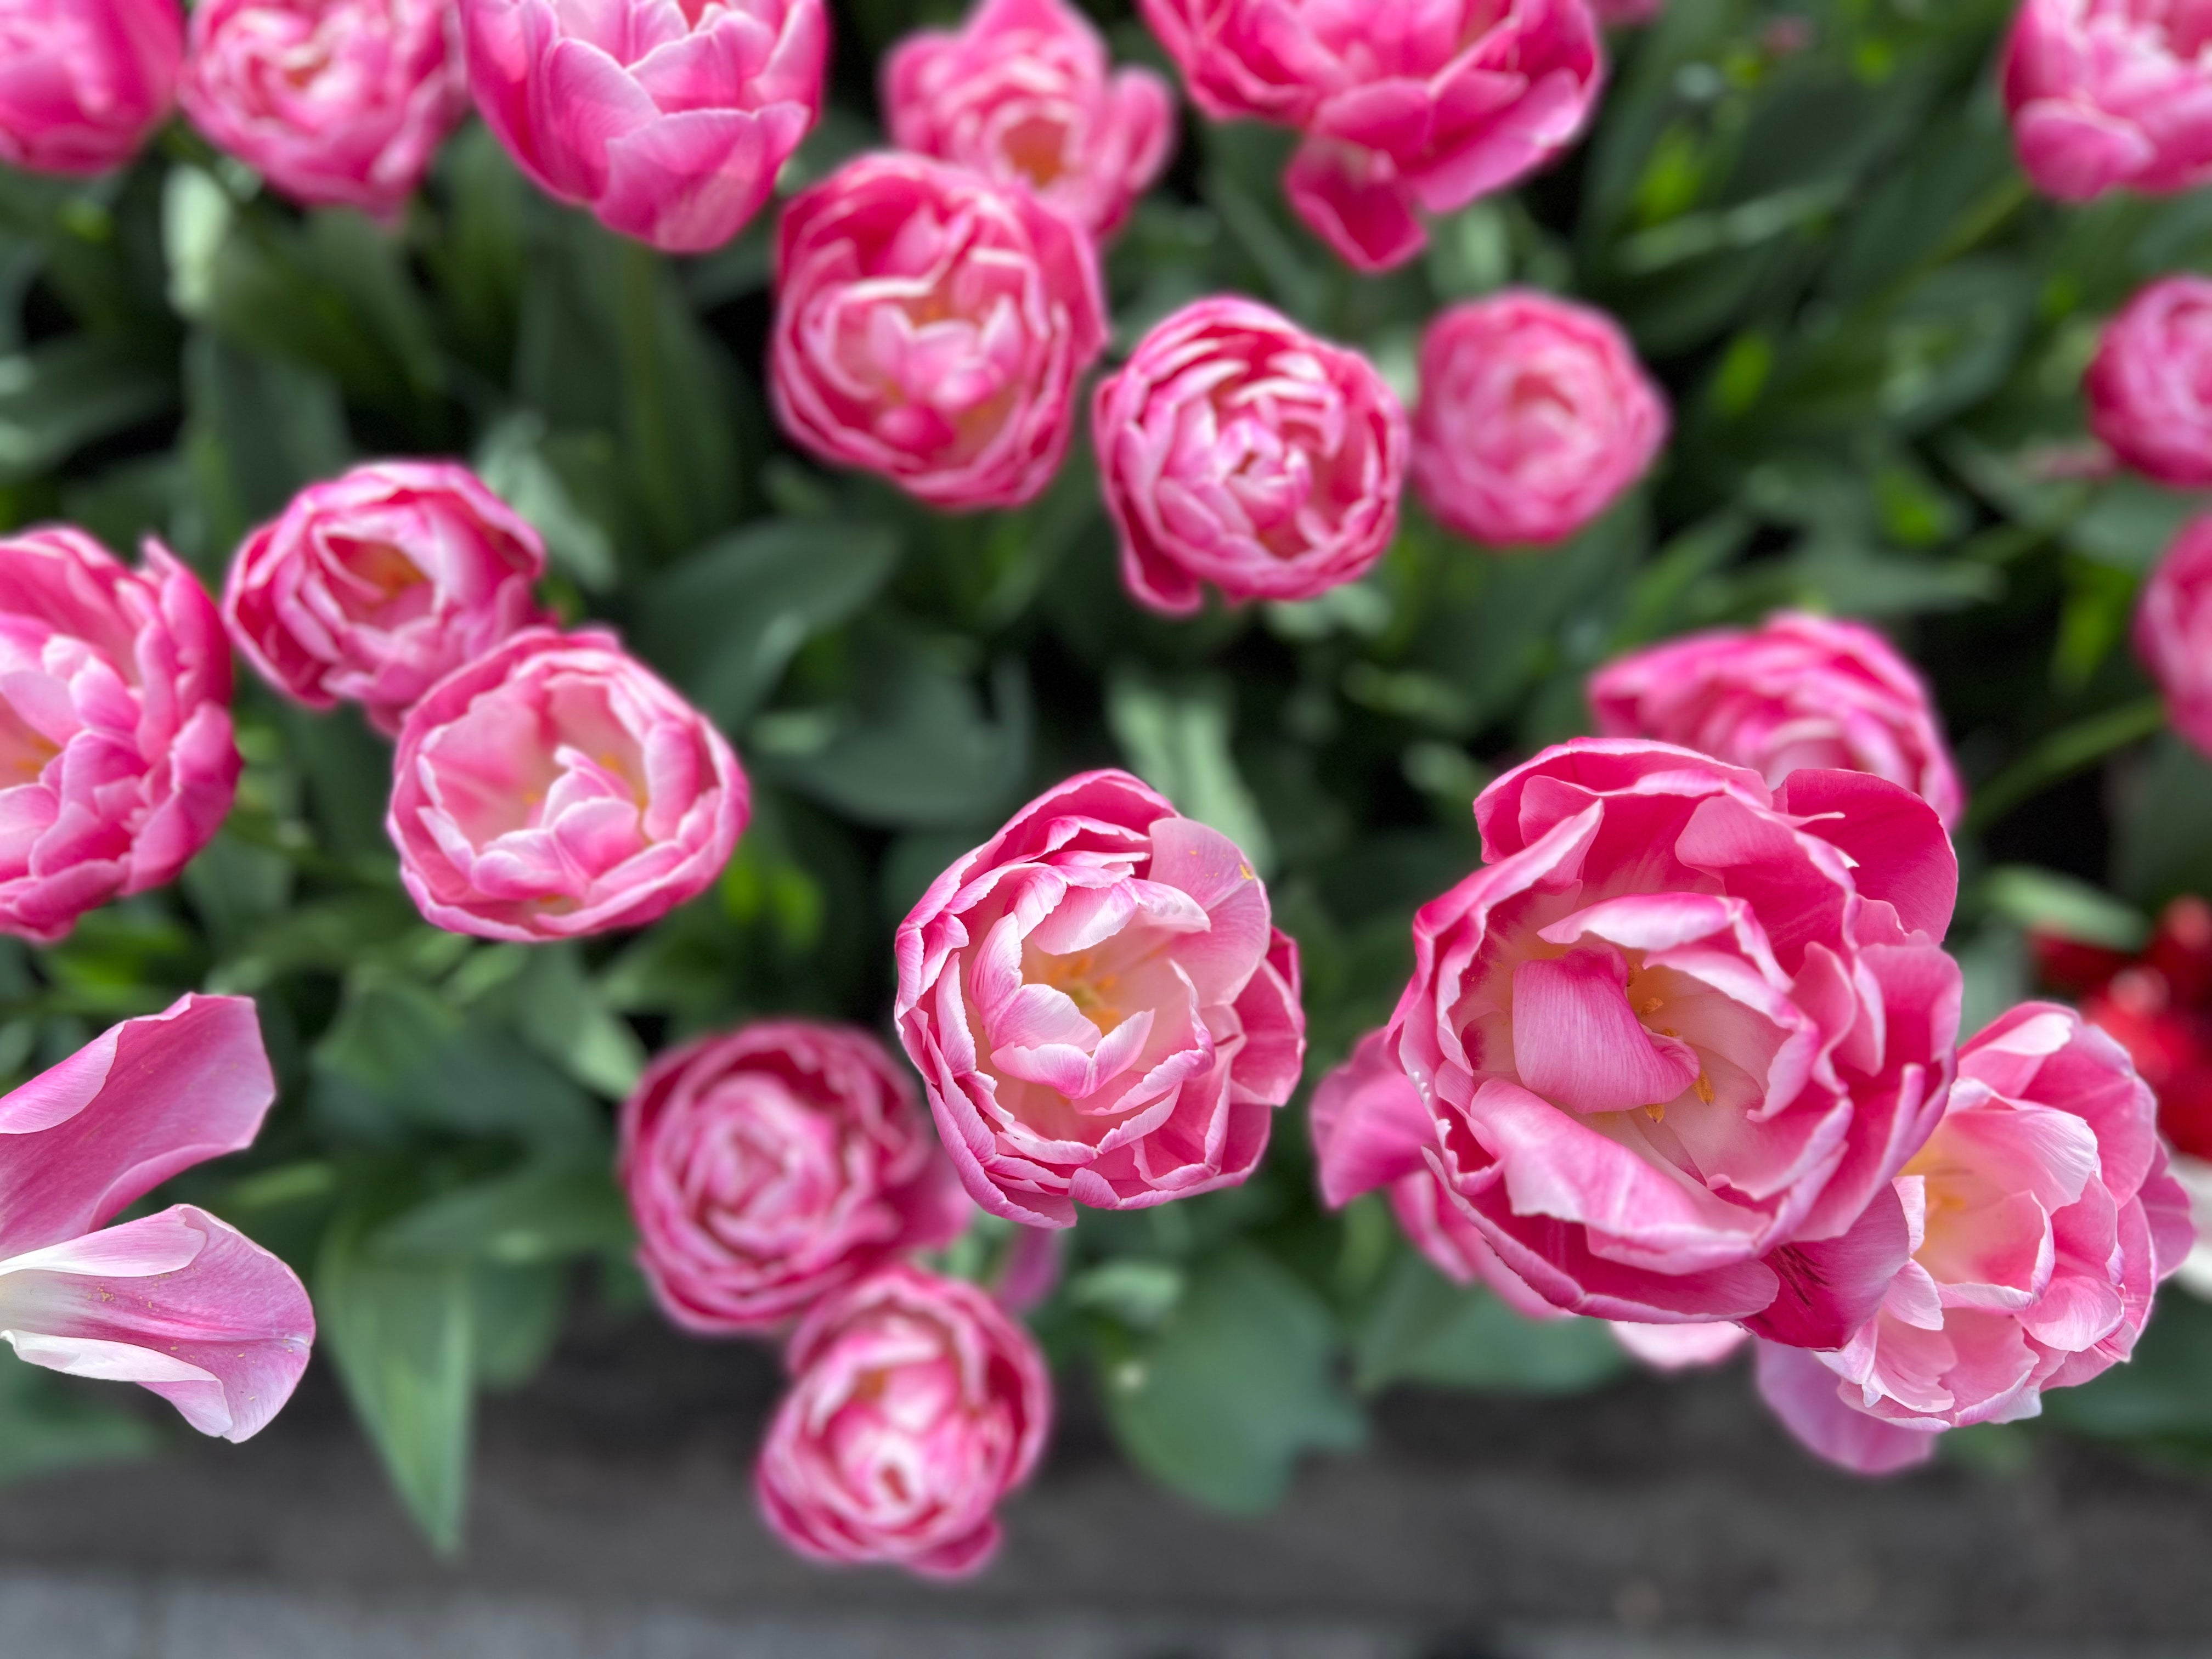 Vogue Tulip Bulbs - COMING SEPTEMBER 17TH!